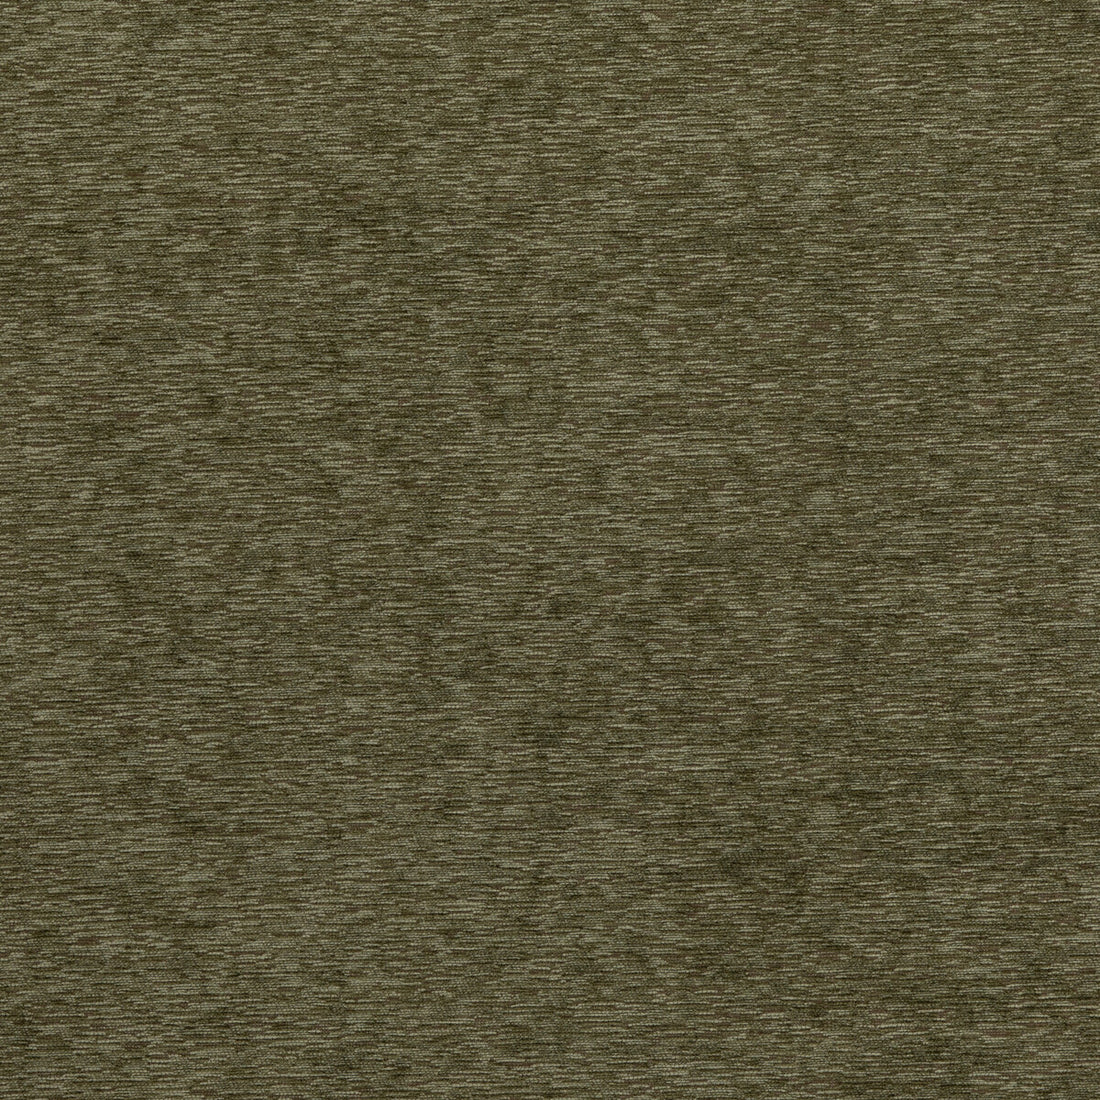 Maismore fabric in olive color - pattern BF10871.730.0 - by G P &amp; J Baker in the Essential Colours II collection